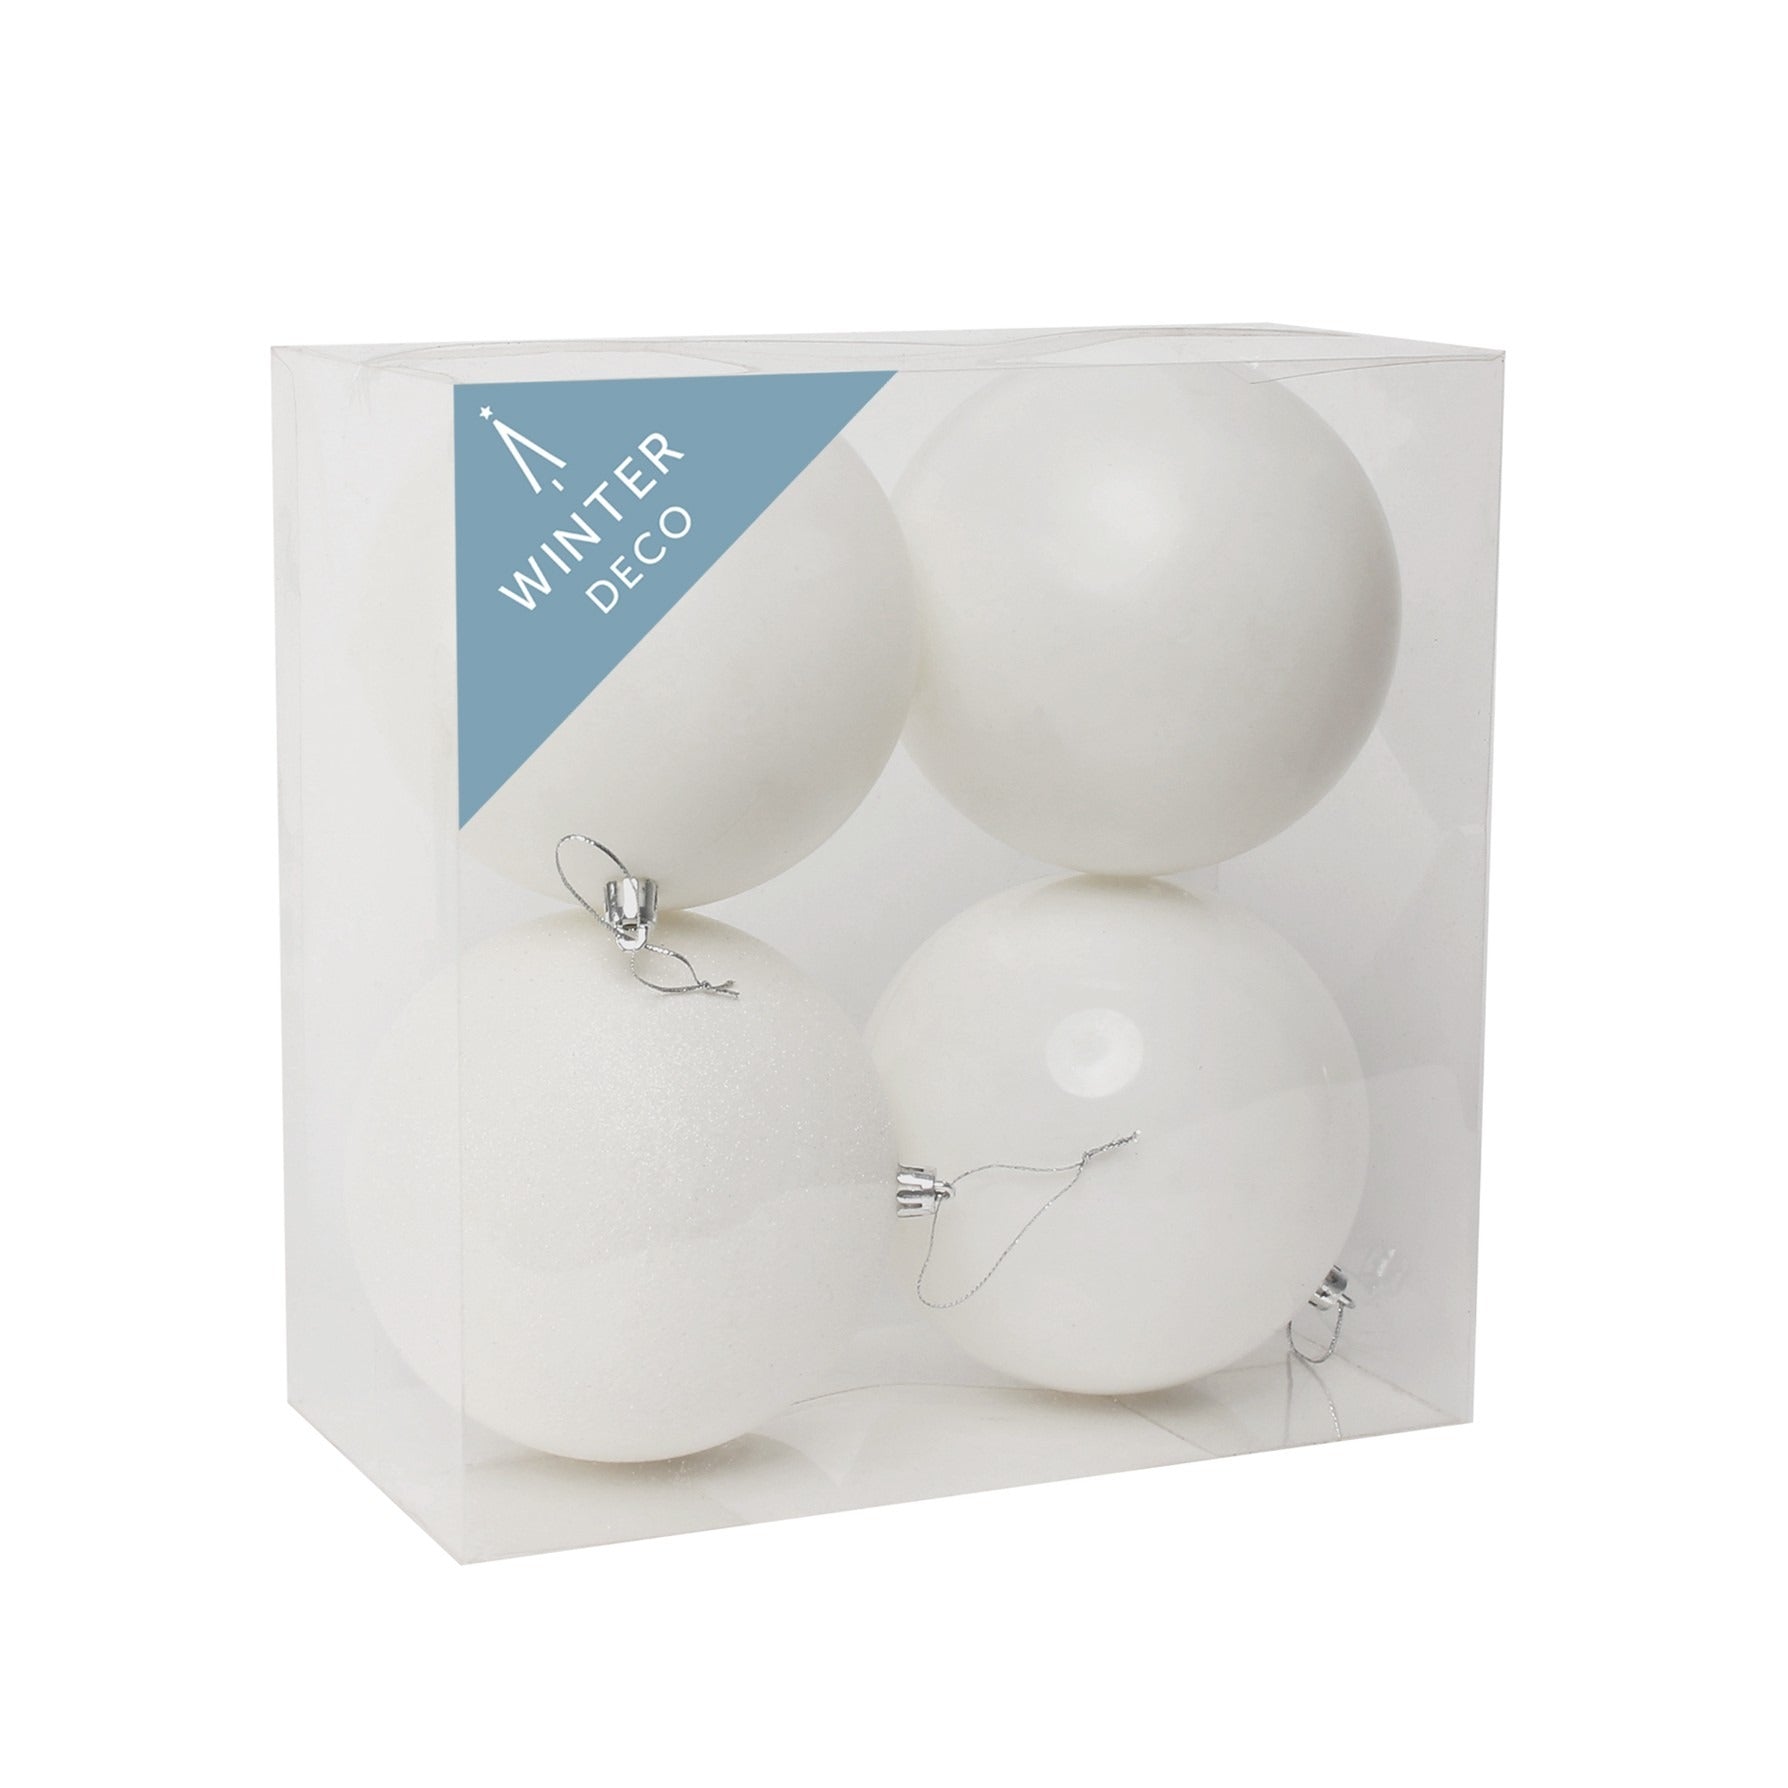 View White Shatterproof Baubles 12cm 4 pieces information